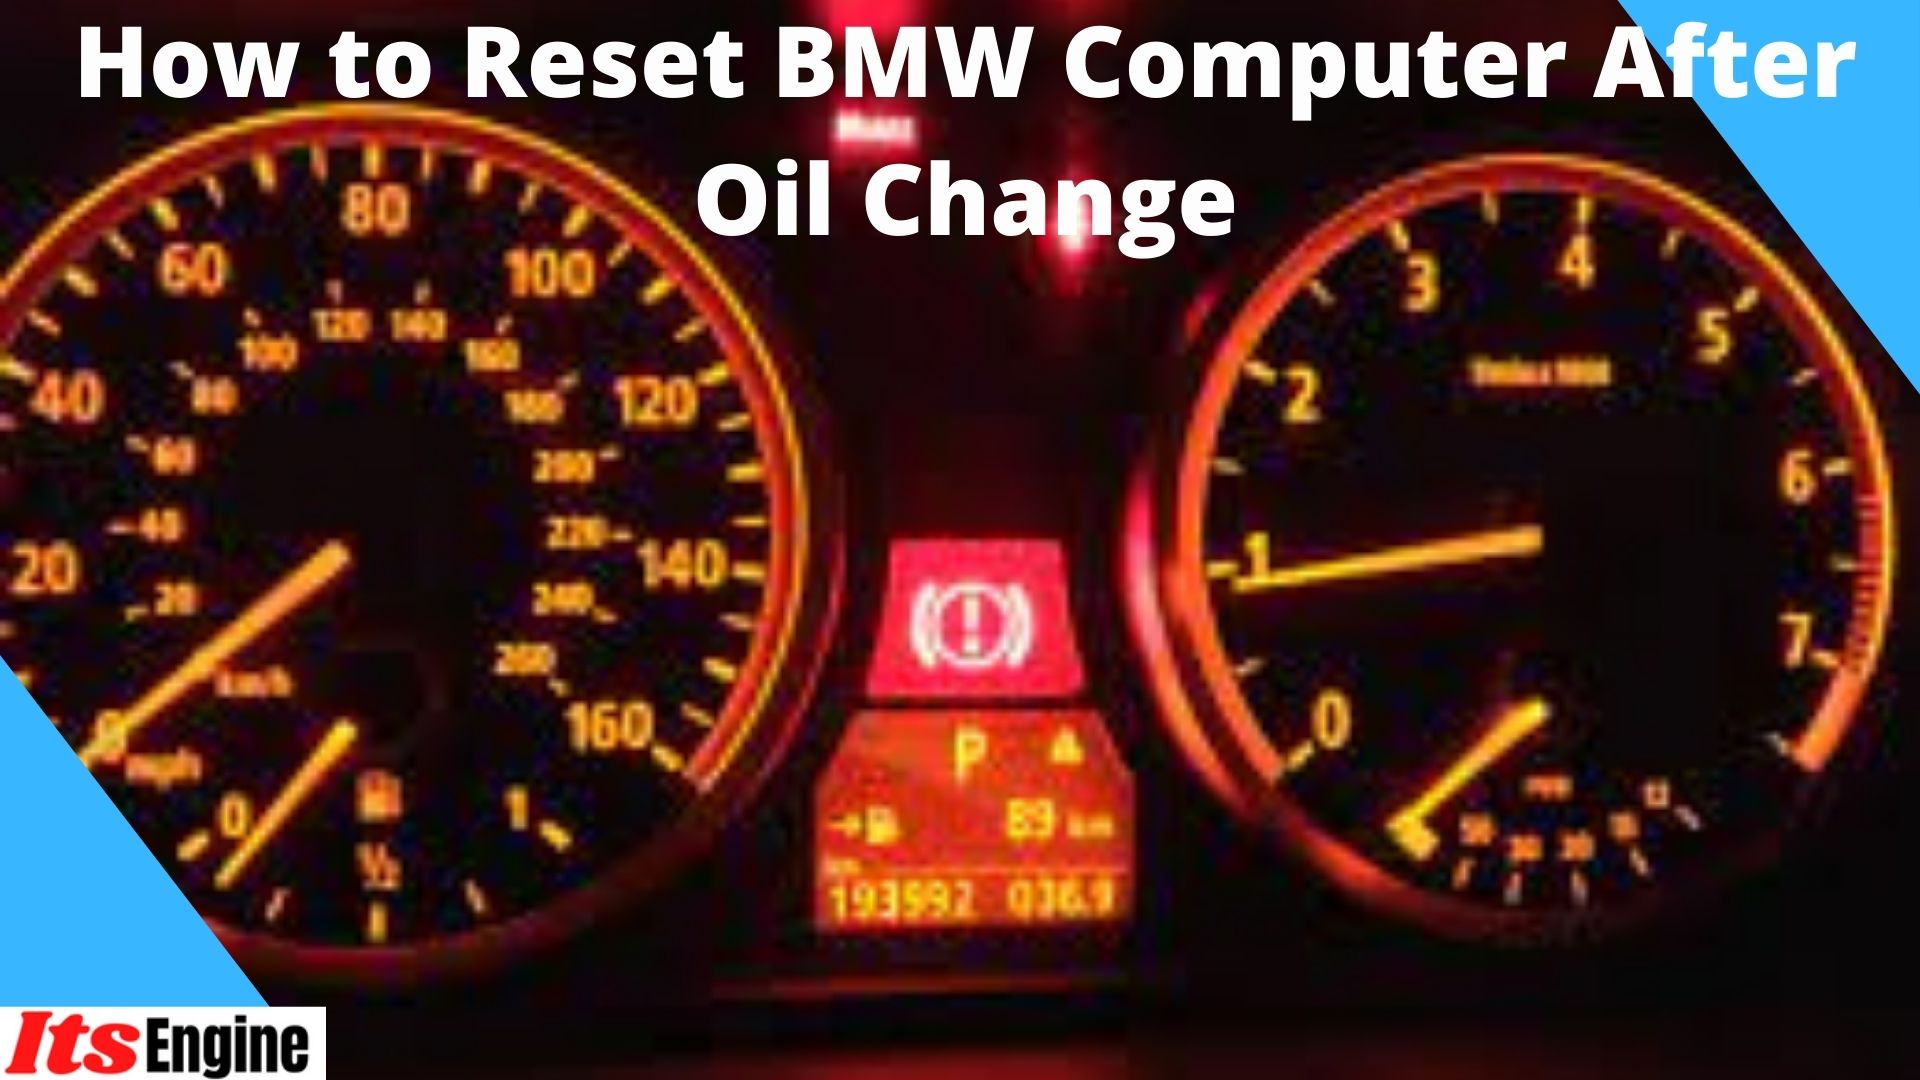 How to Reset BMW Computer After Oil Change